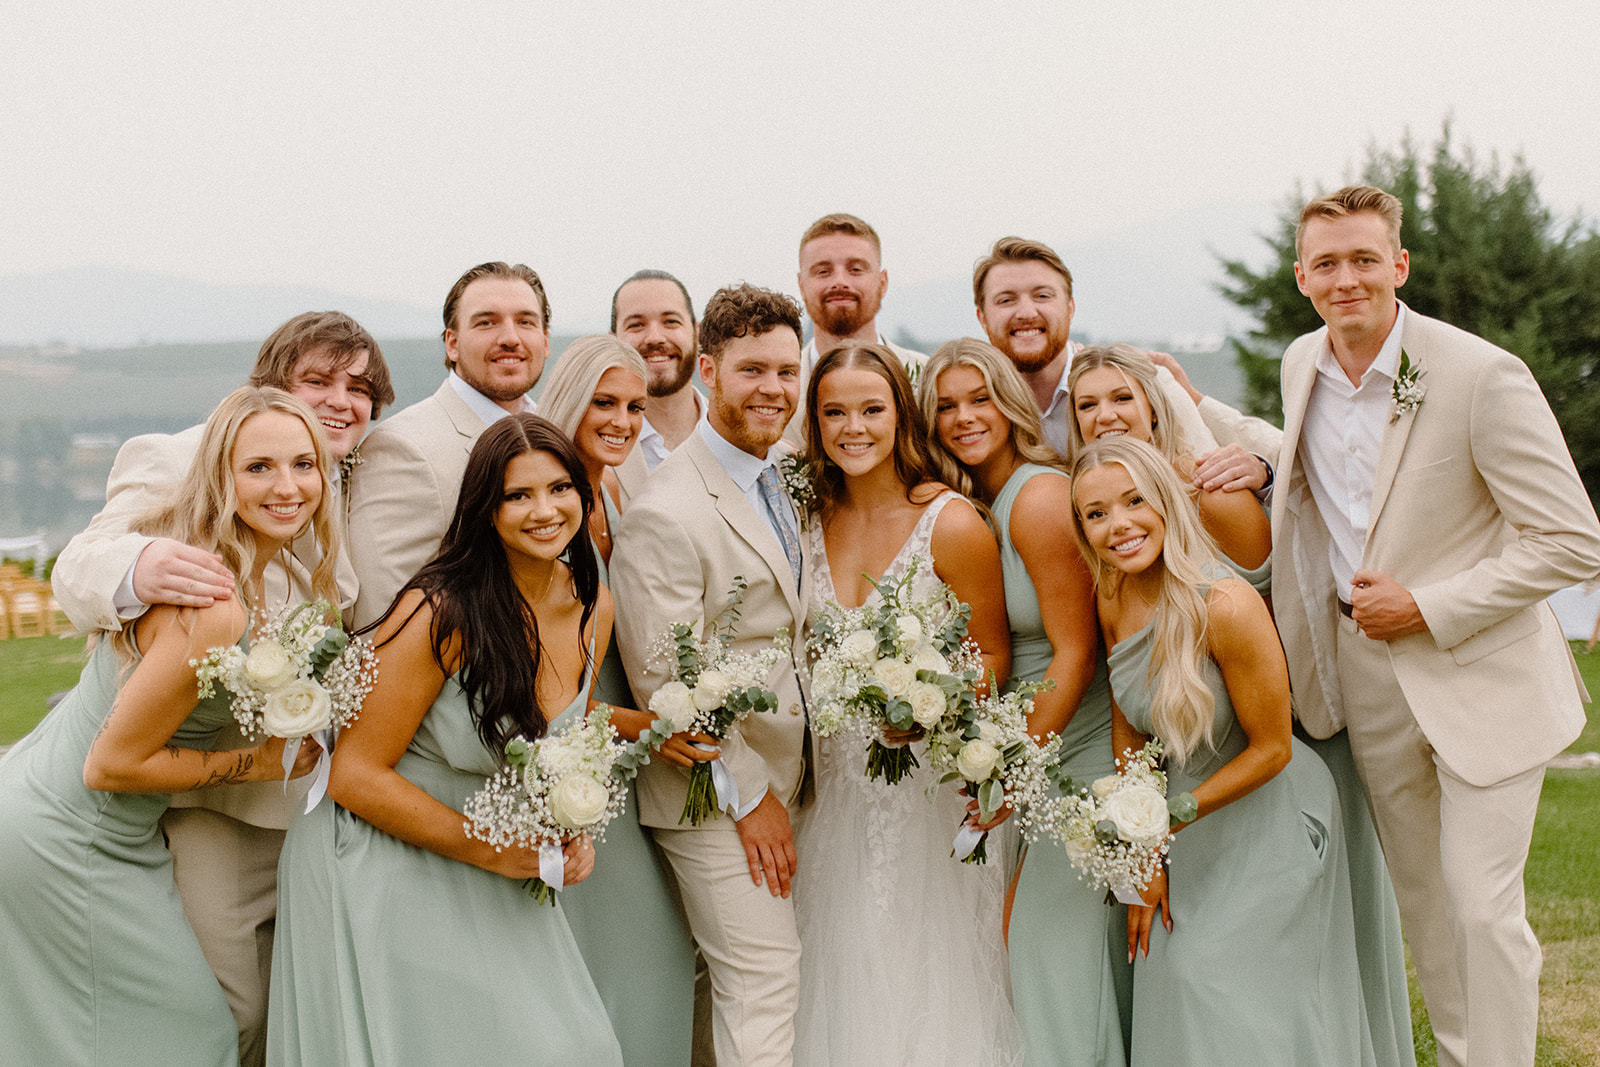 Bride and groom photos with bridal party